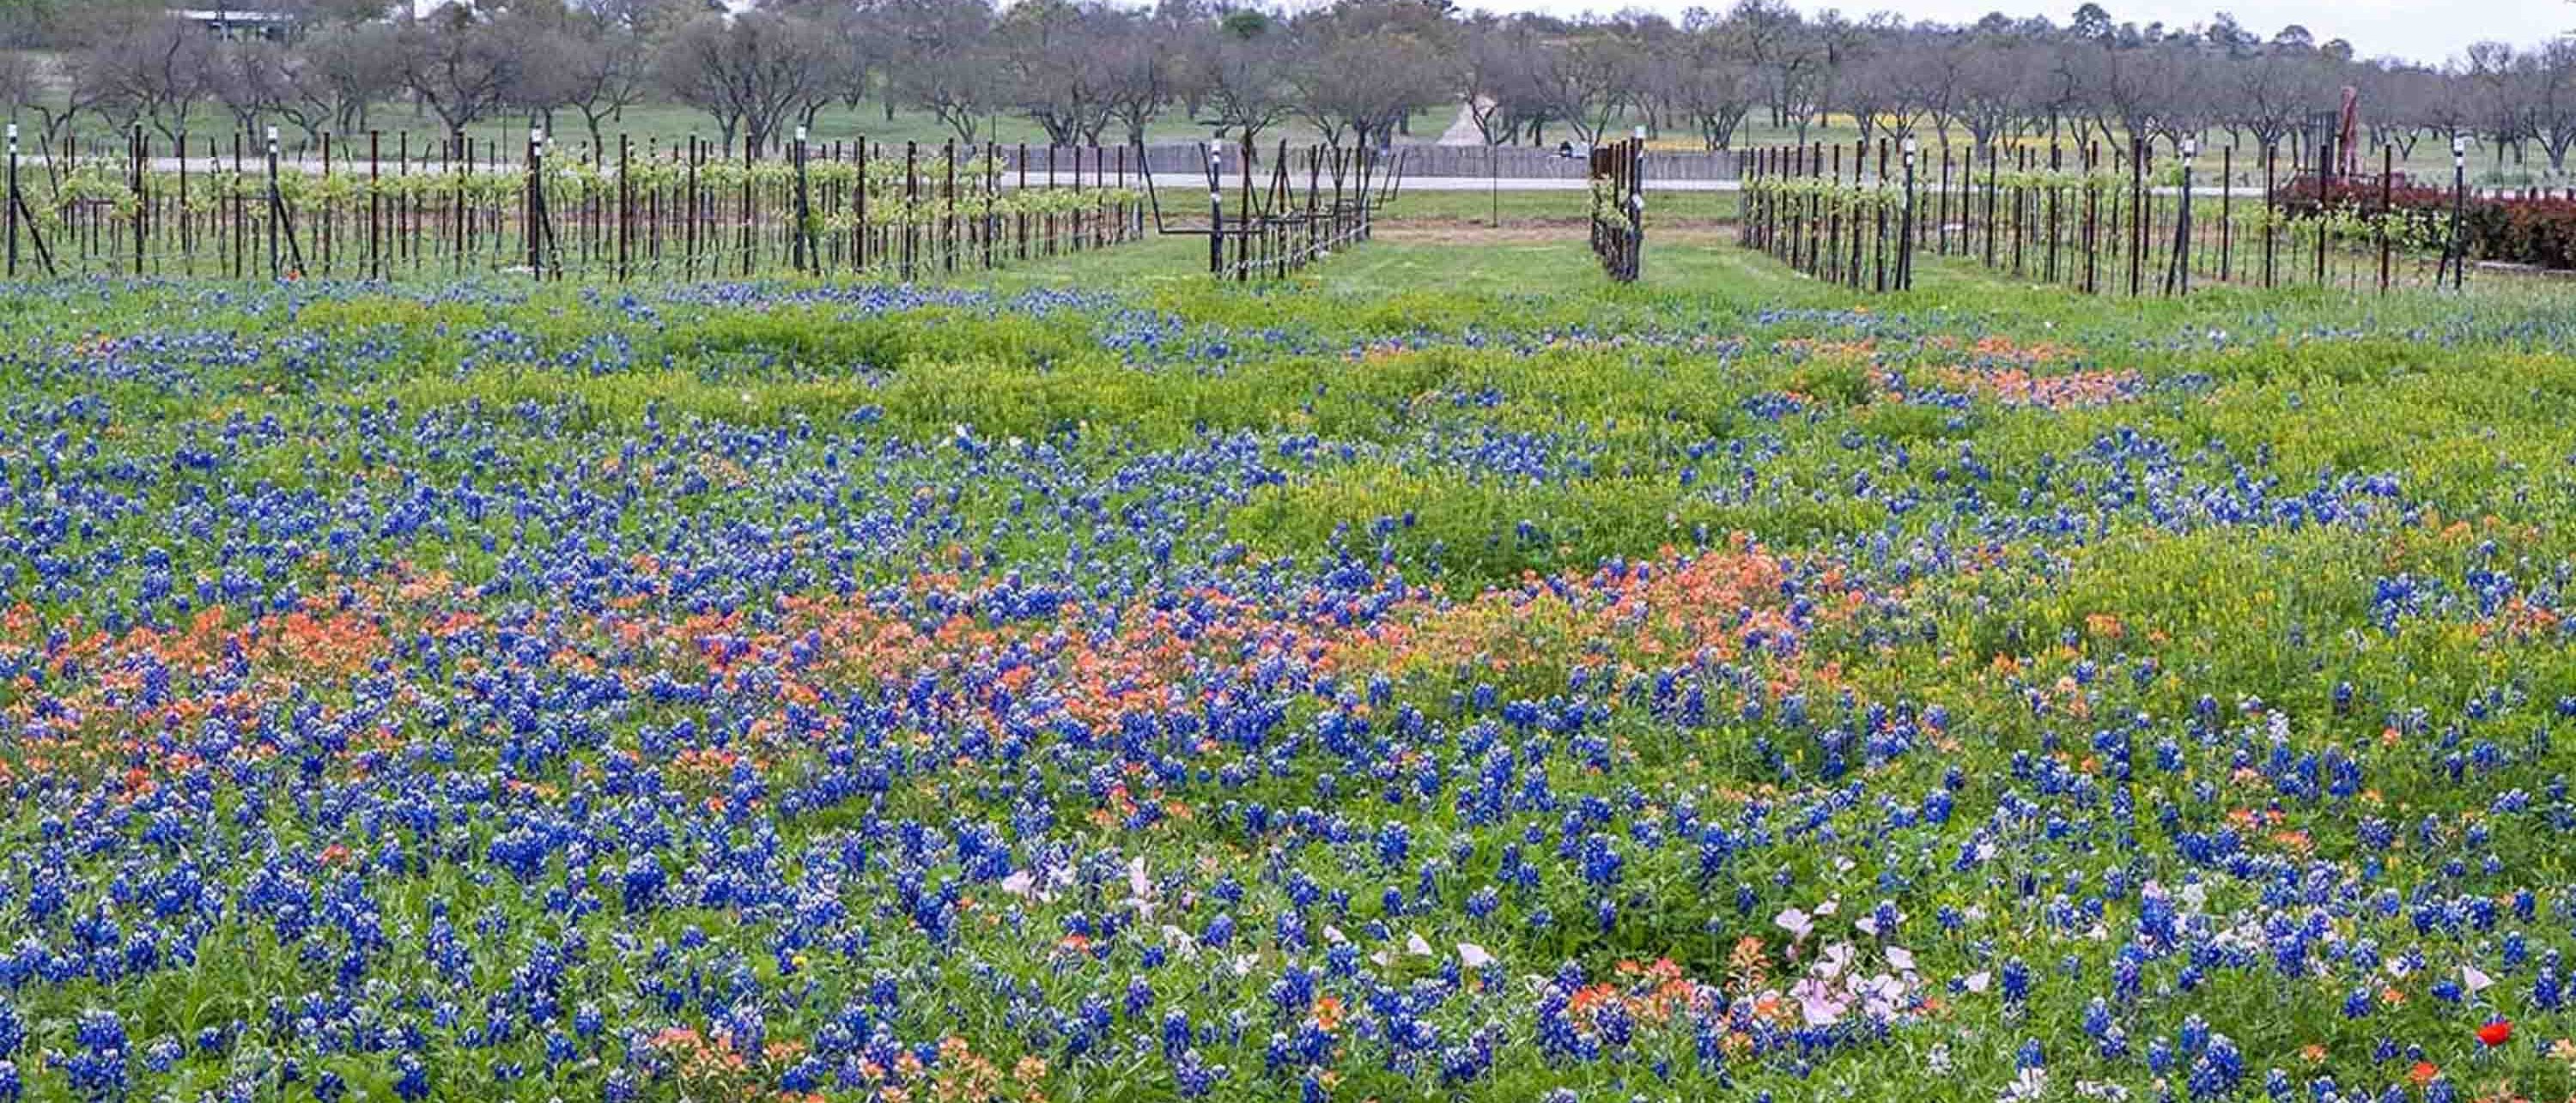 Image of field with flowers in Texas